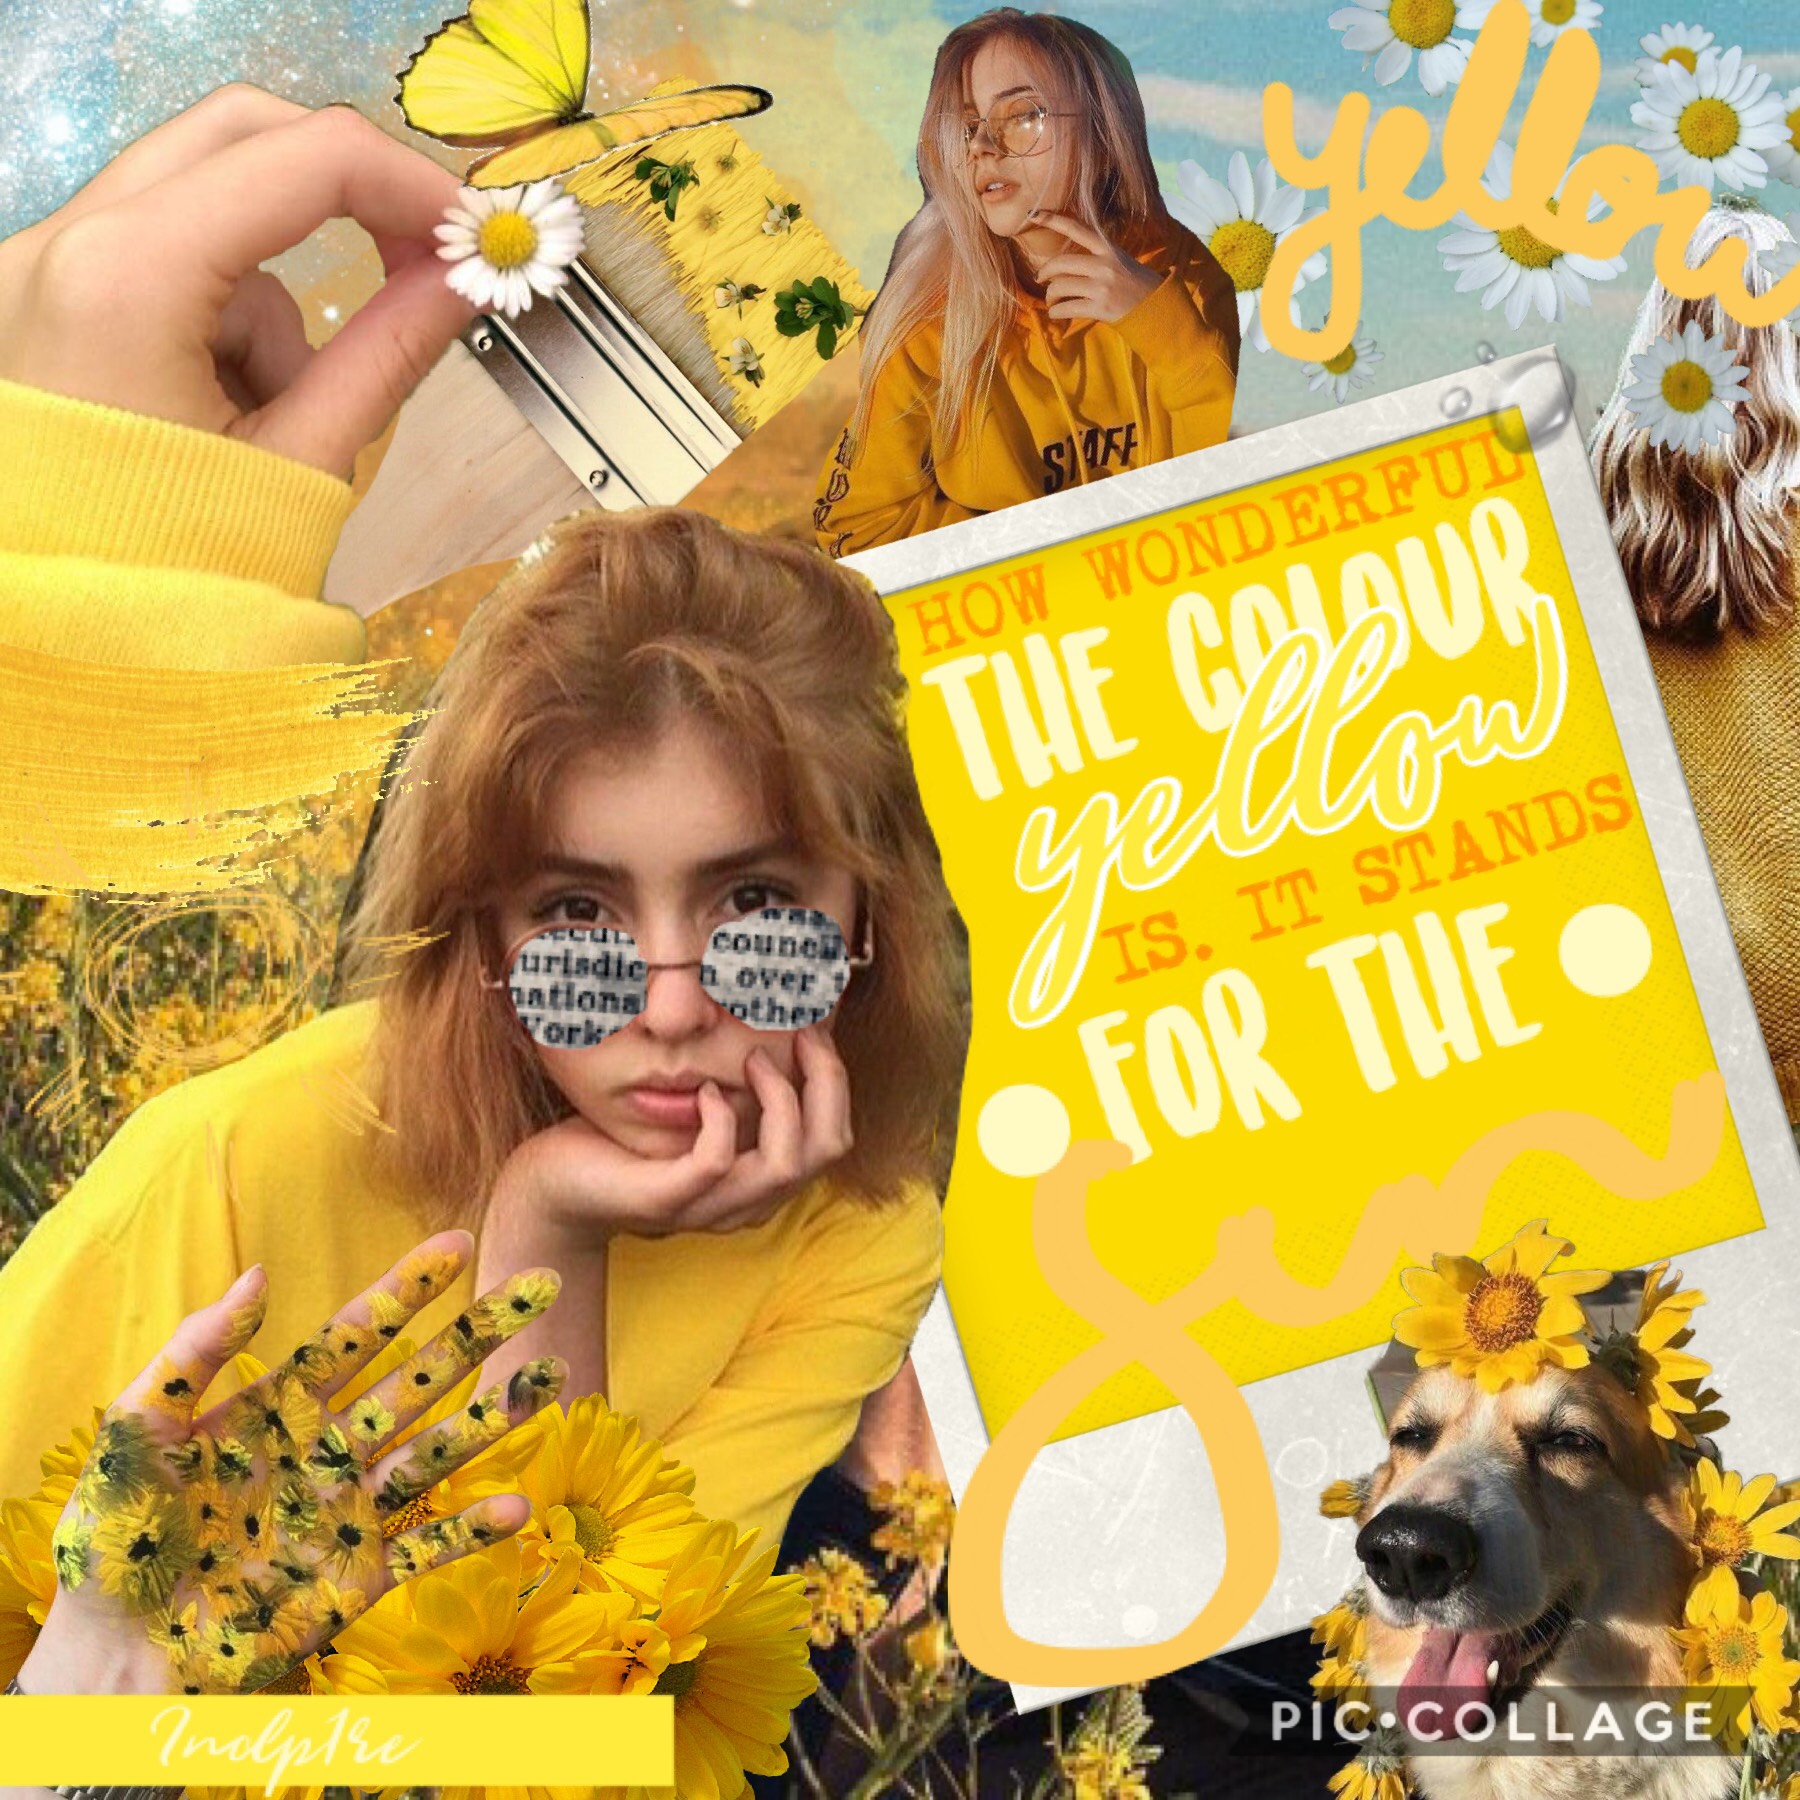      Tap
Ok so this is different. It’s quite messy but I hope that u like it.
Plz rate 1-10 (again) tysm💕
QOTD:🍍 or 🍉
AOTD:probably 🍍